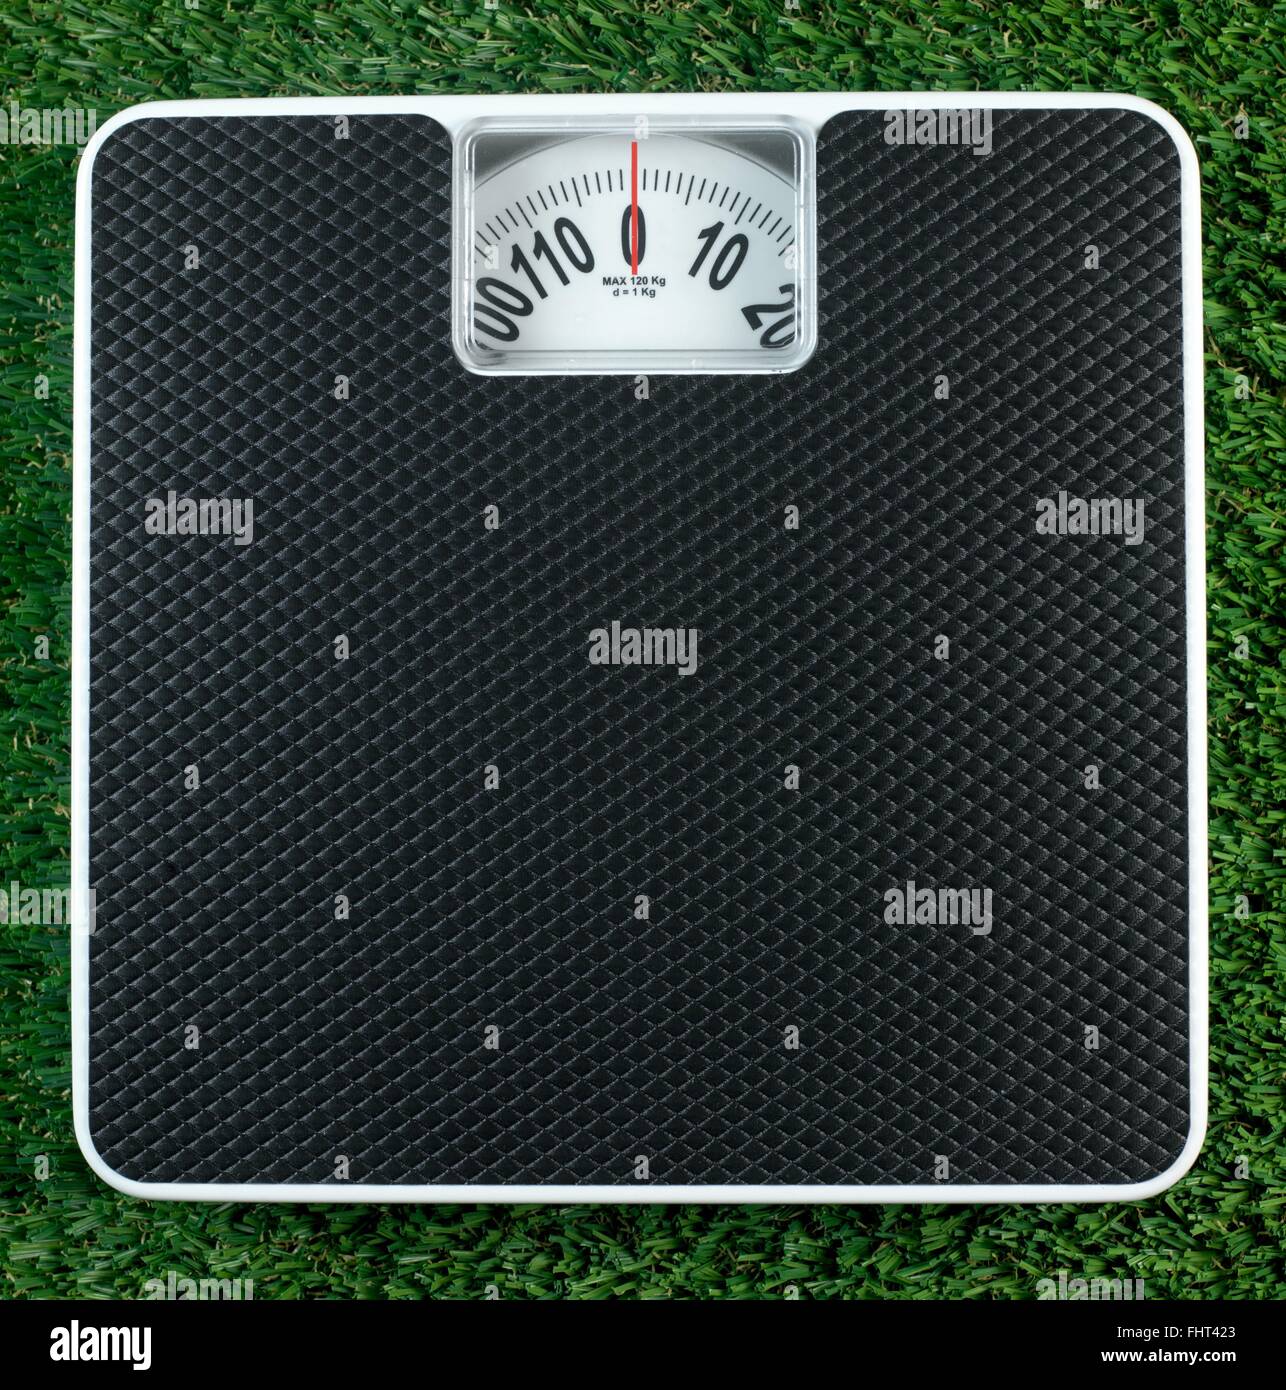 https://c8.alamy.com/comp/FHT423/bathroom-scales-isolated-against-green-grass-FHT423.jpg